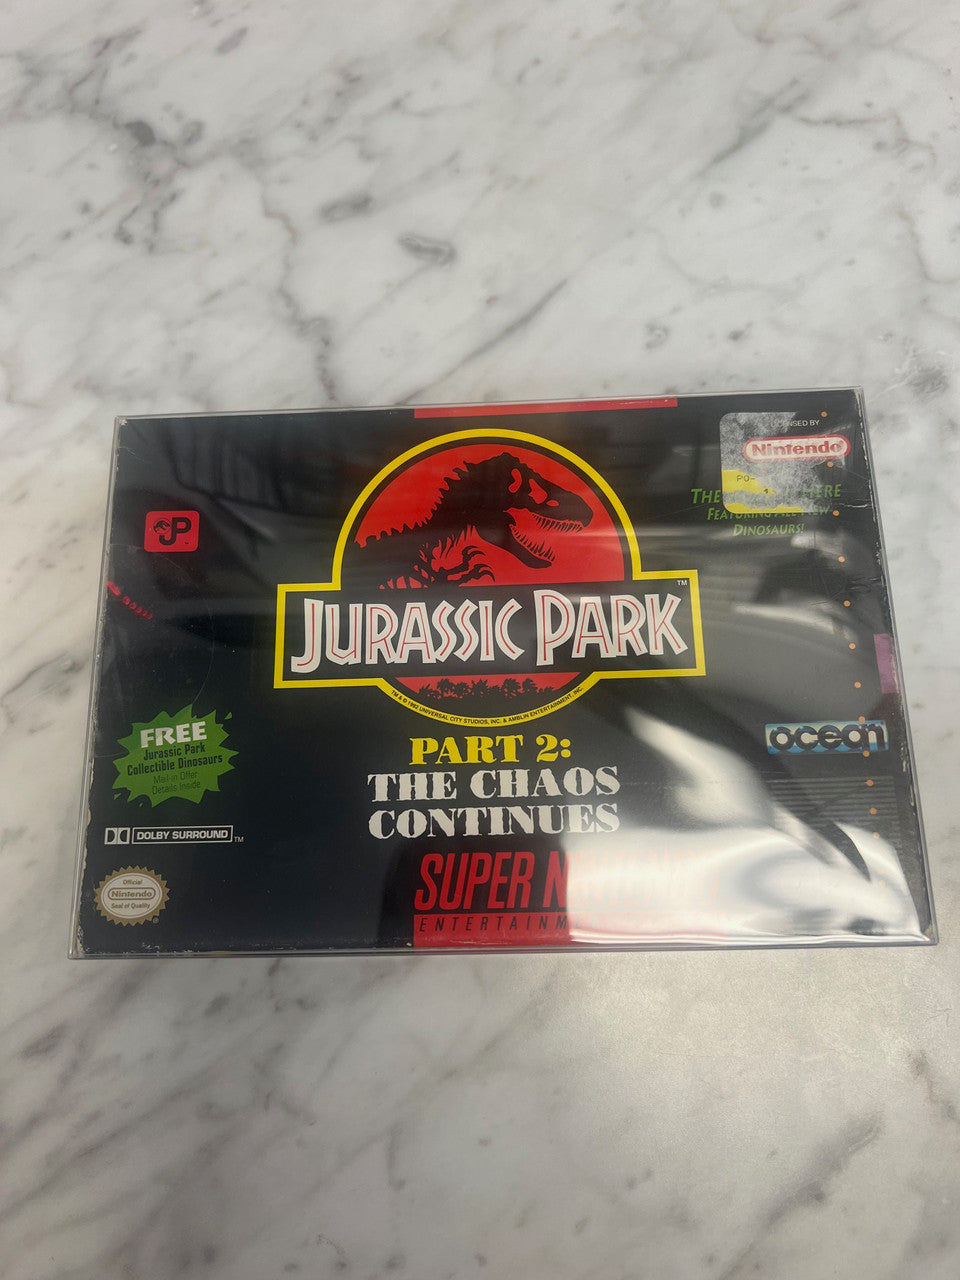 Jurassic Park Part 2: The Chaos Continues Super Nintendo SNES Box and Manual Only